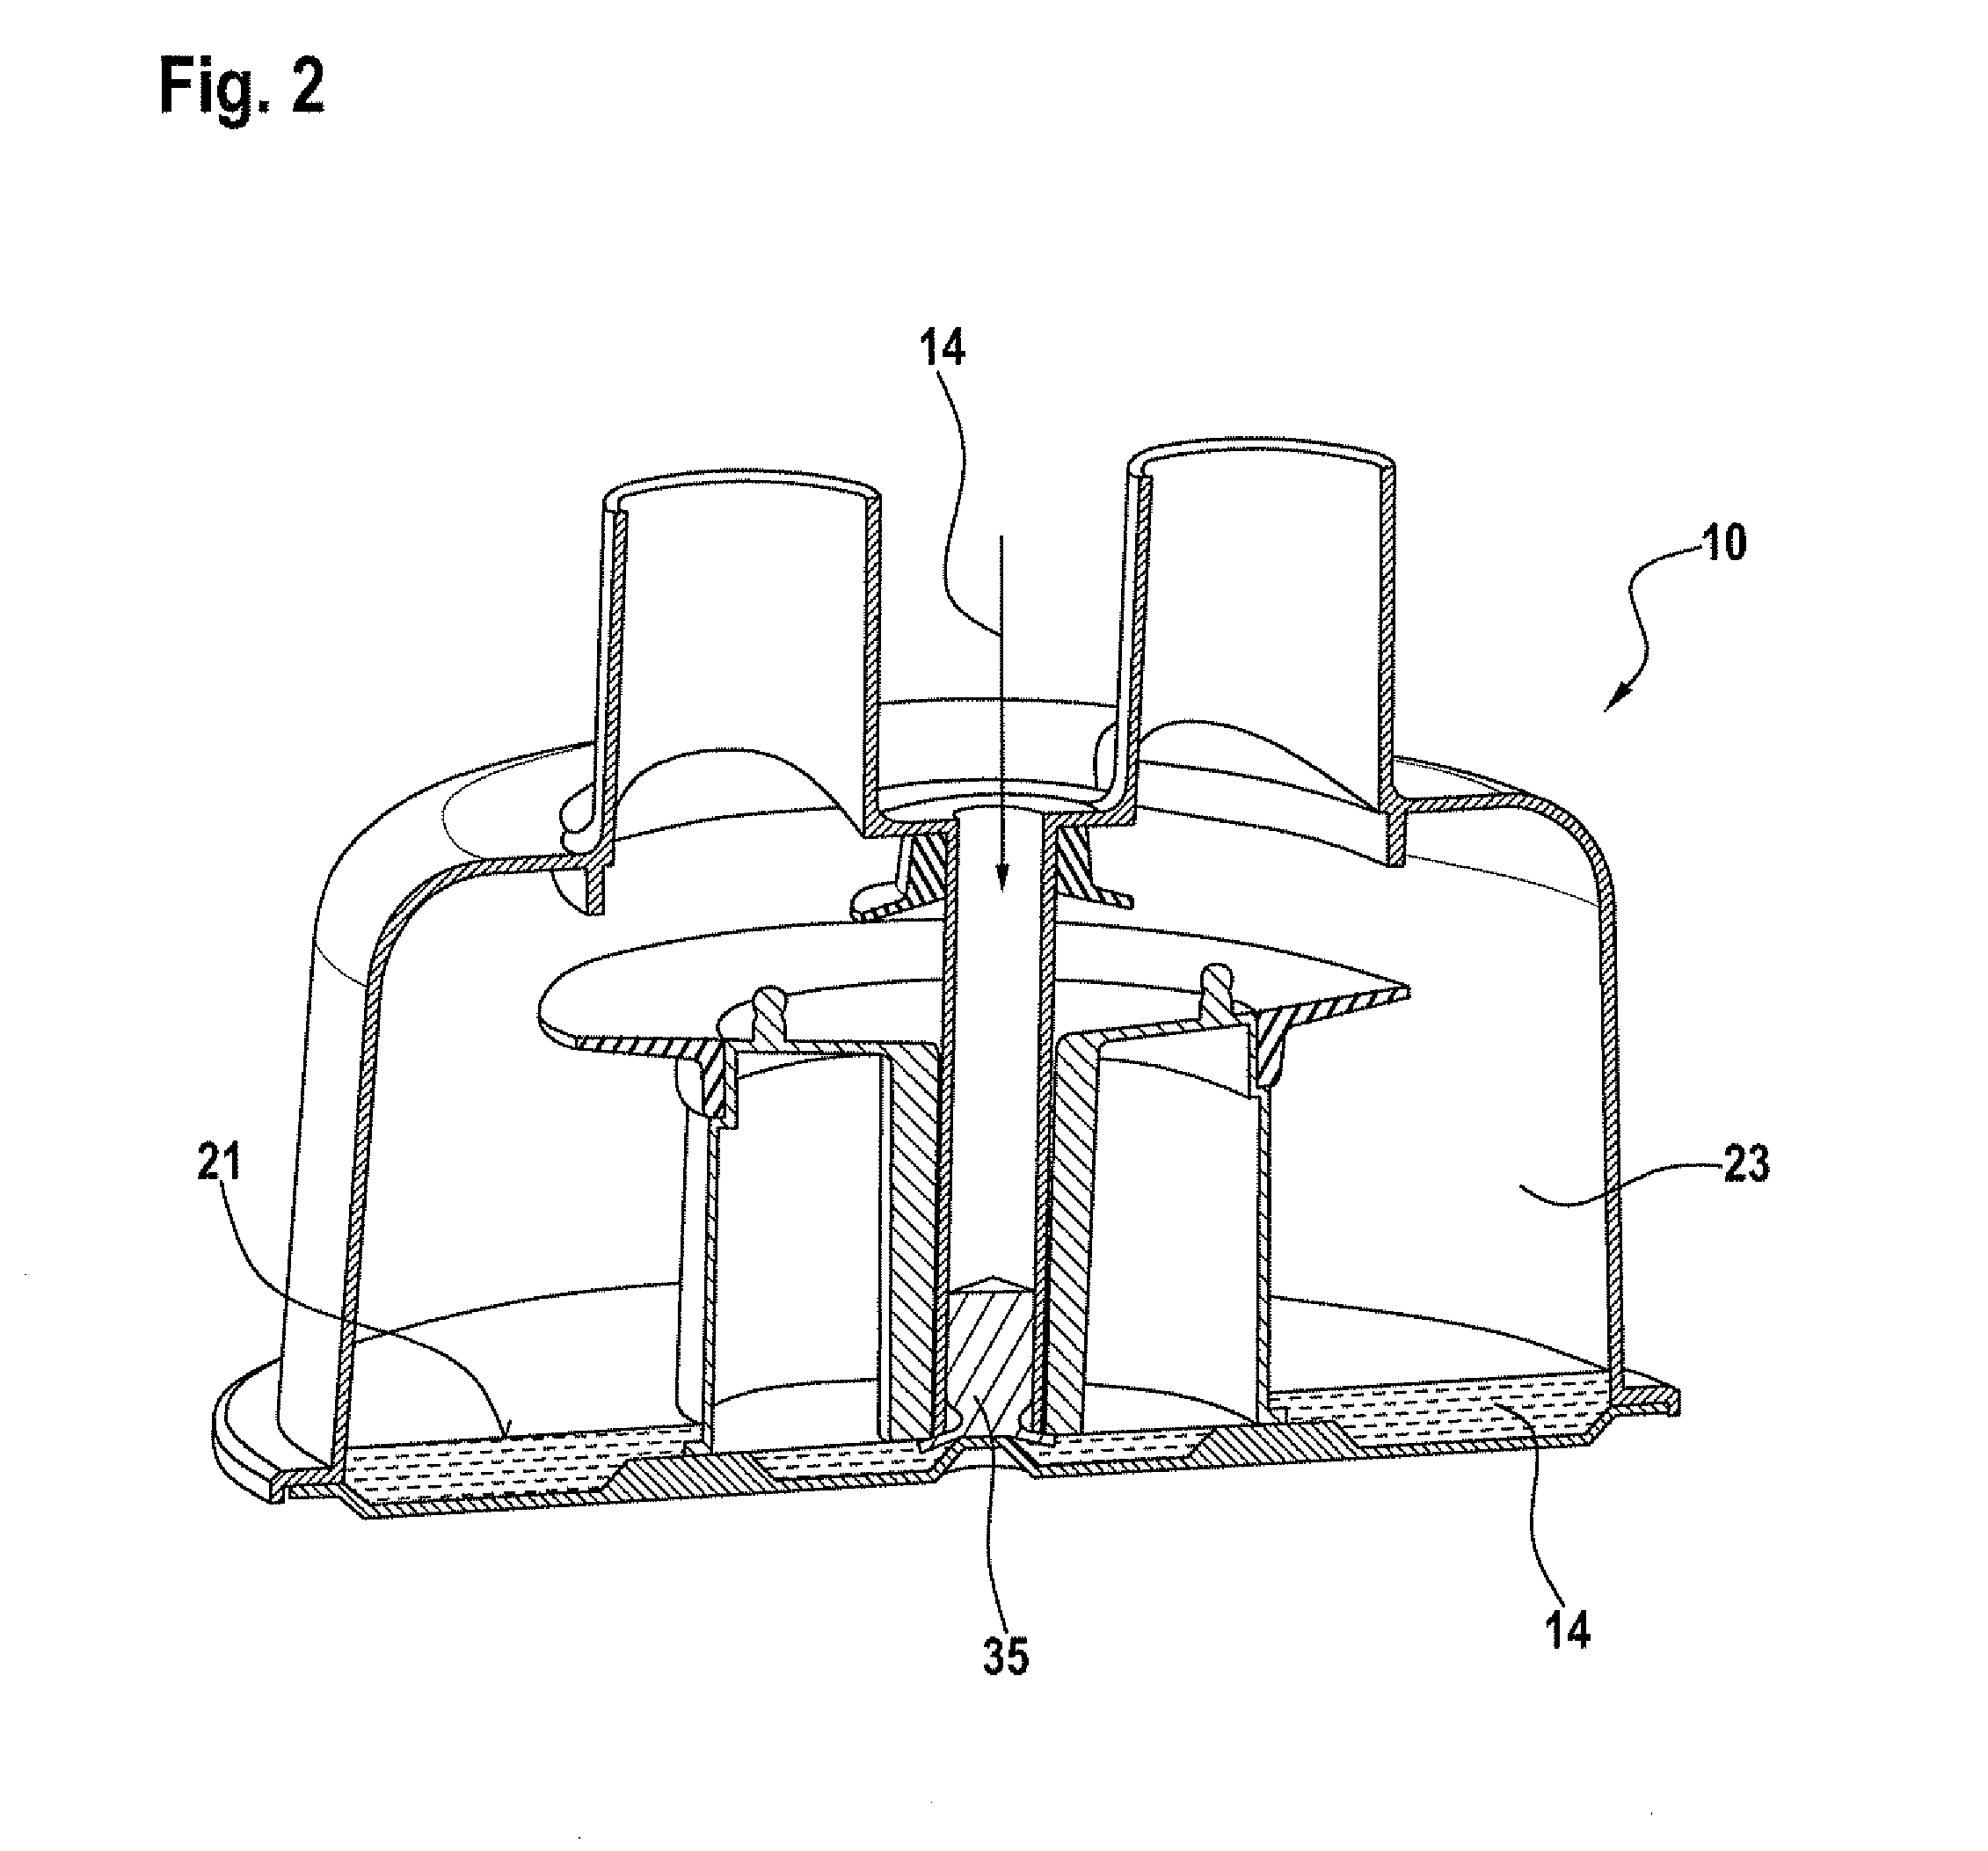 Device for humidifying breathing air for artificial respiration